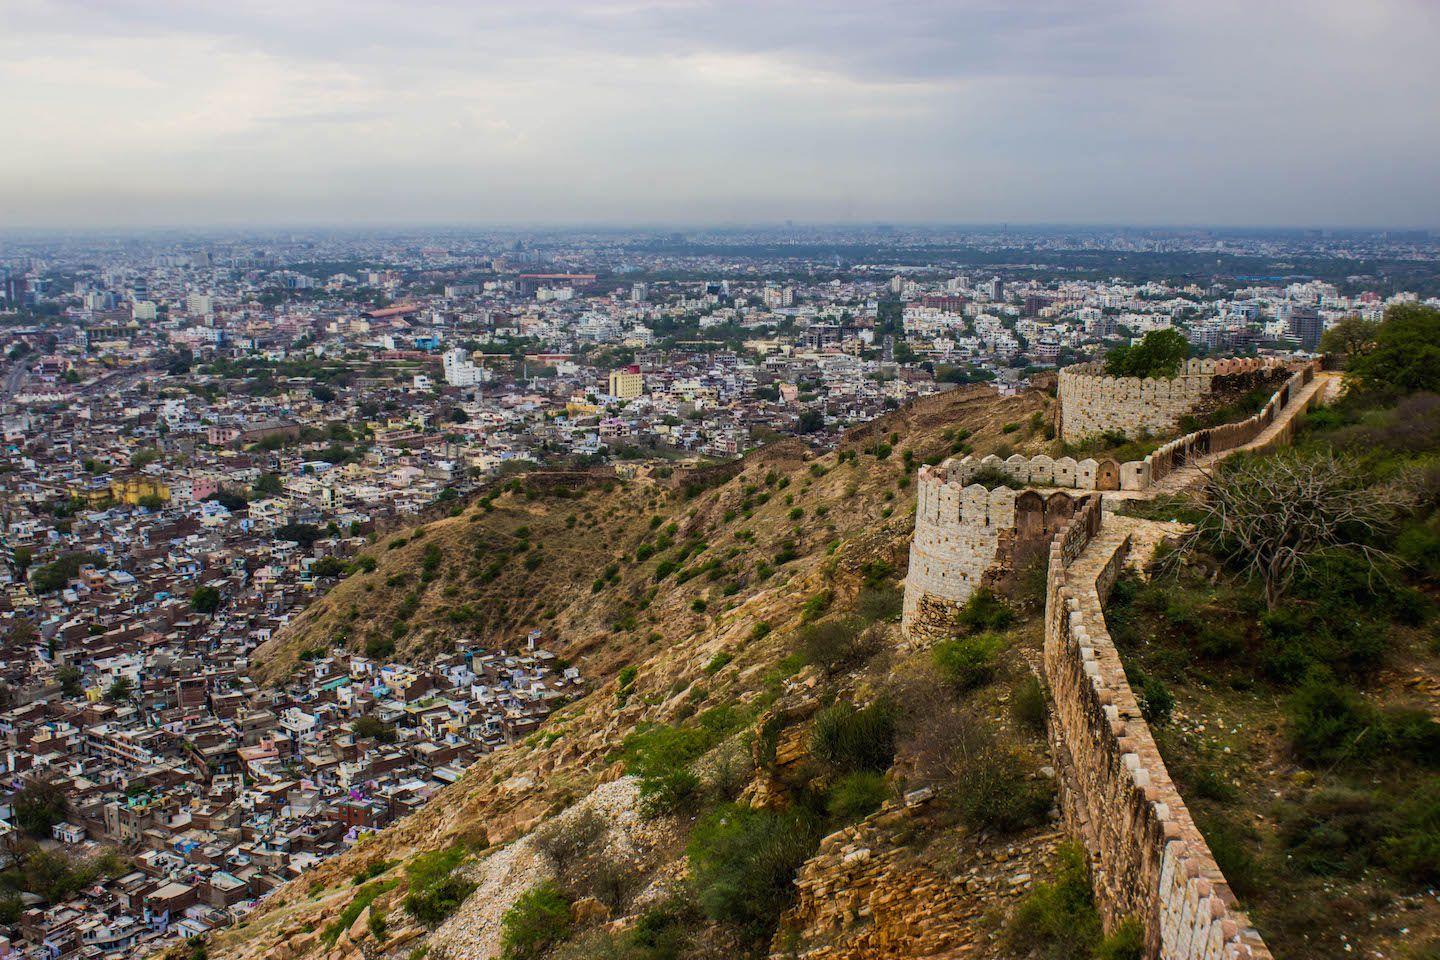 View of Jaipur from Nahagarh Fort, India